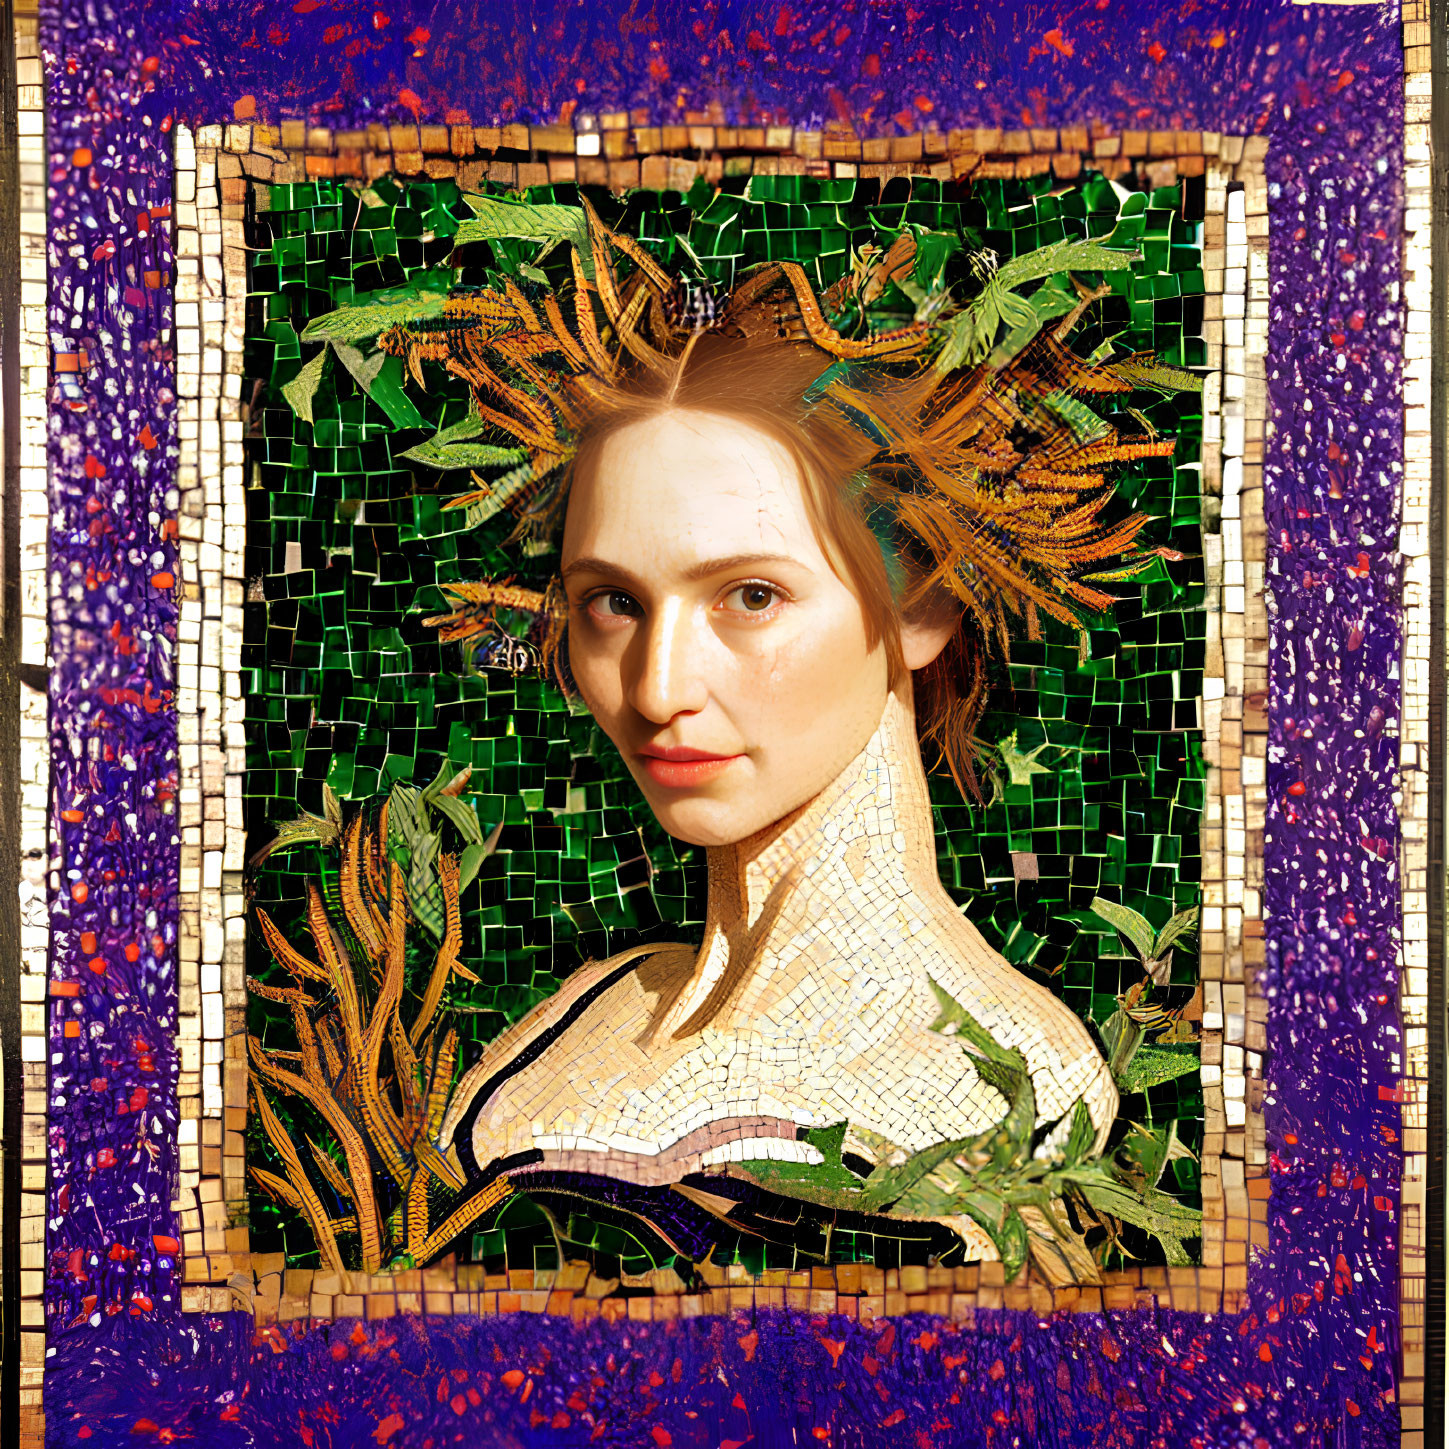 Mosaic Artwork: Woman Portrait with Green and Golden Foliage